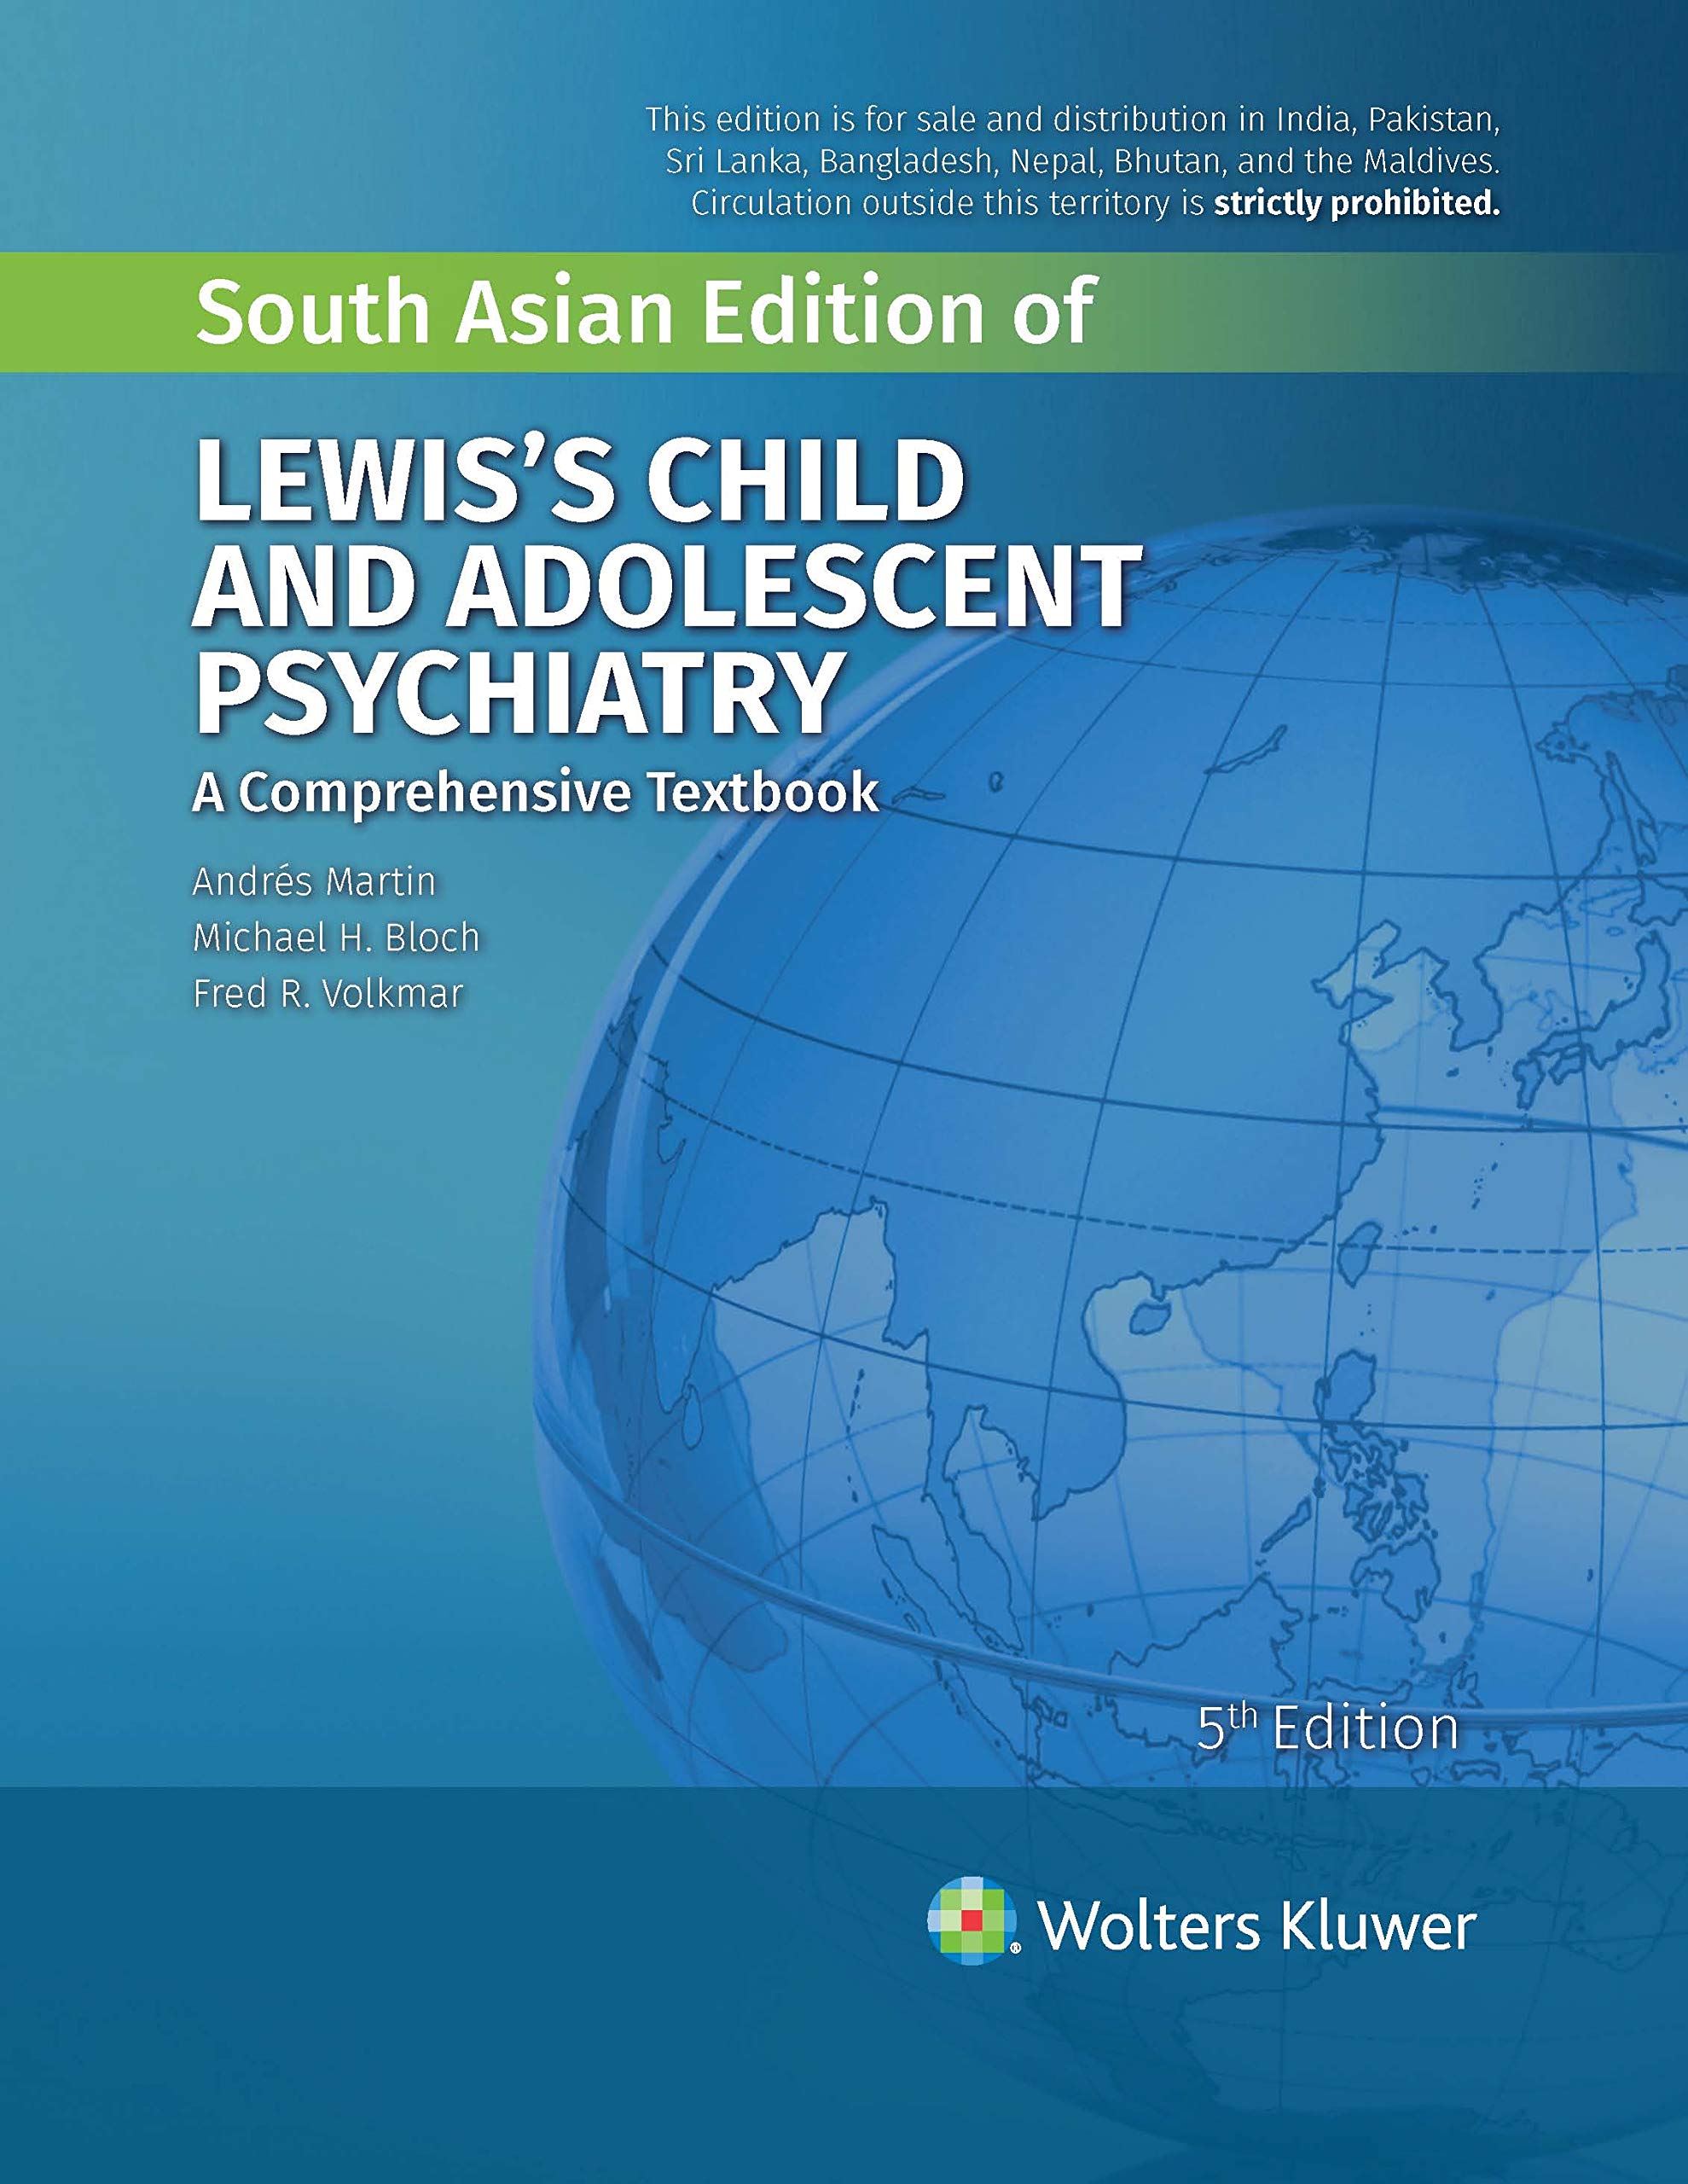 lewiss-child-and-adolescent-psychiatry-a-comprehensive-textbook-5th-edition-aibh-exclusive